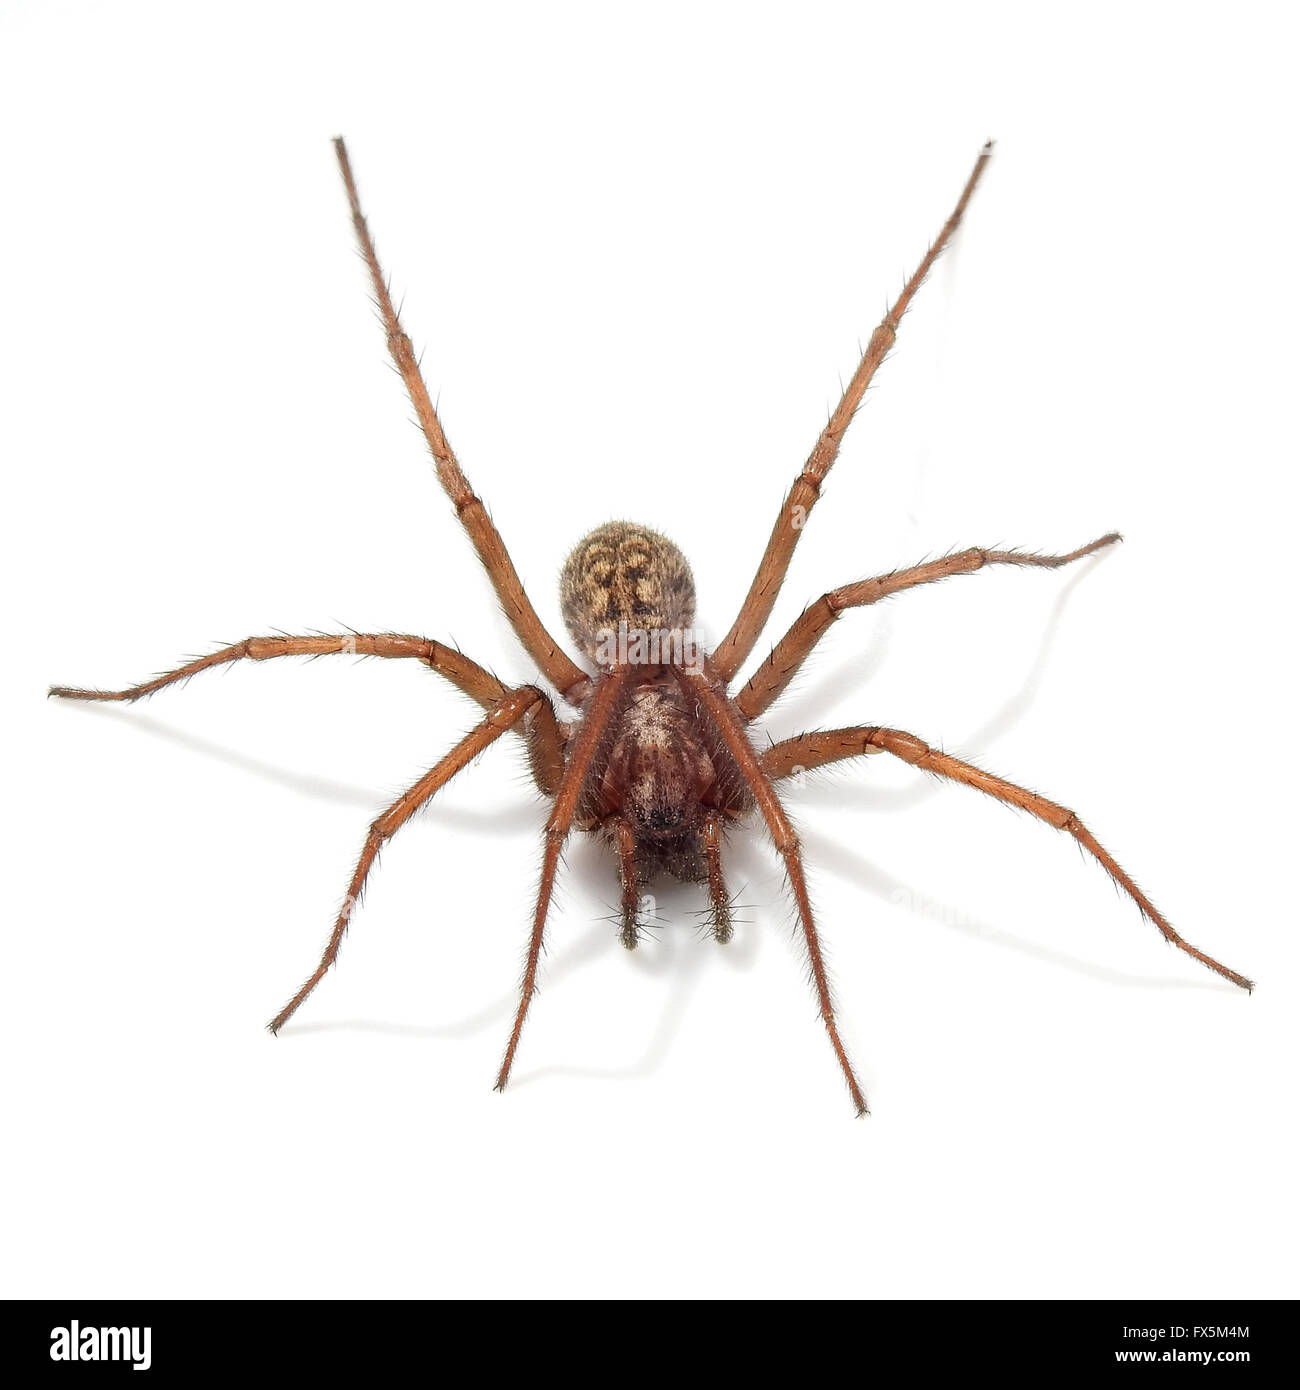 Giant house spider on a white background Stock Photo